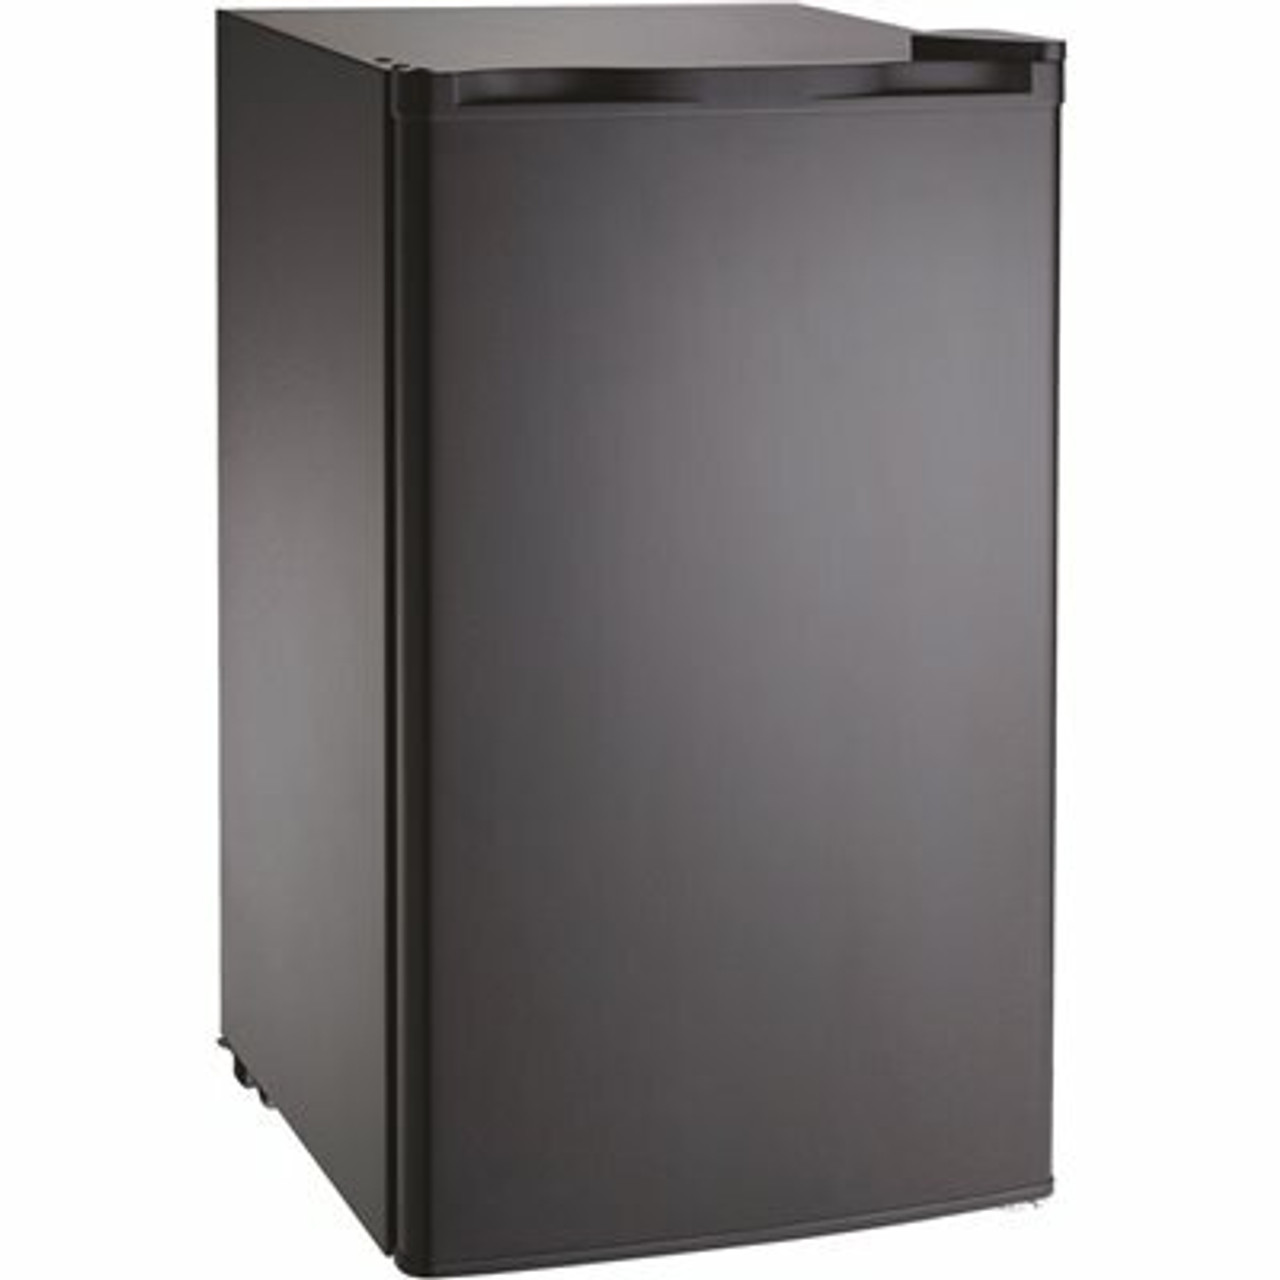 Lodging Star 3.6 Cu.Ft. Mini Refrigerator Without Freezer In Black